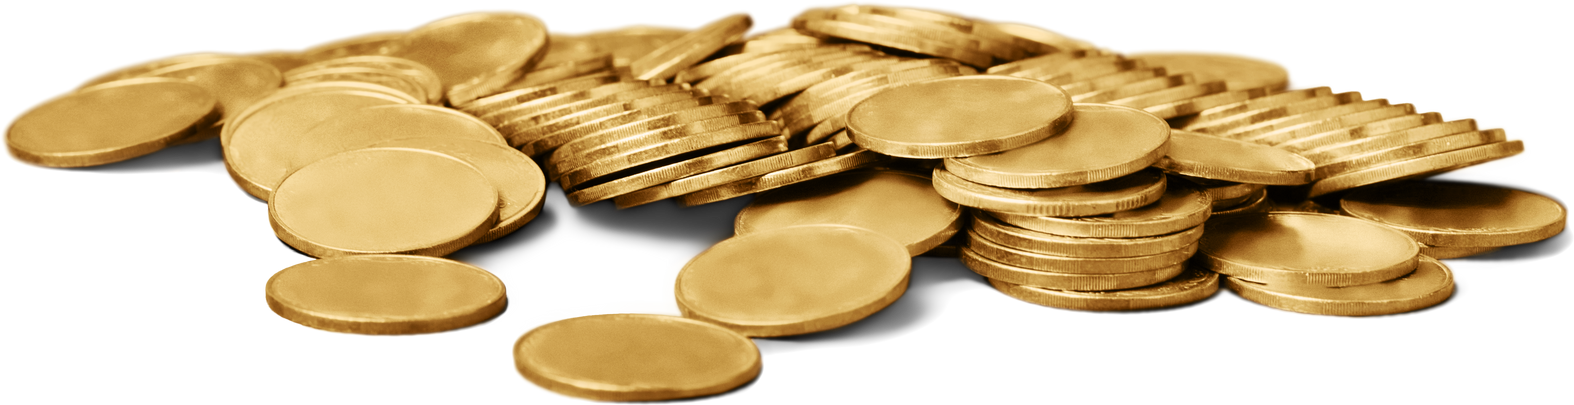 Golden Coins on a White Background